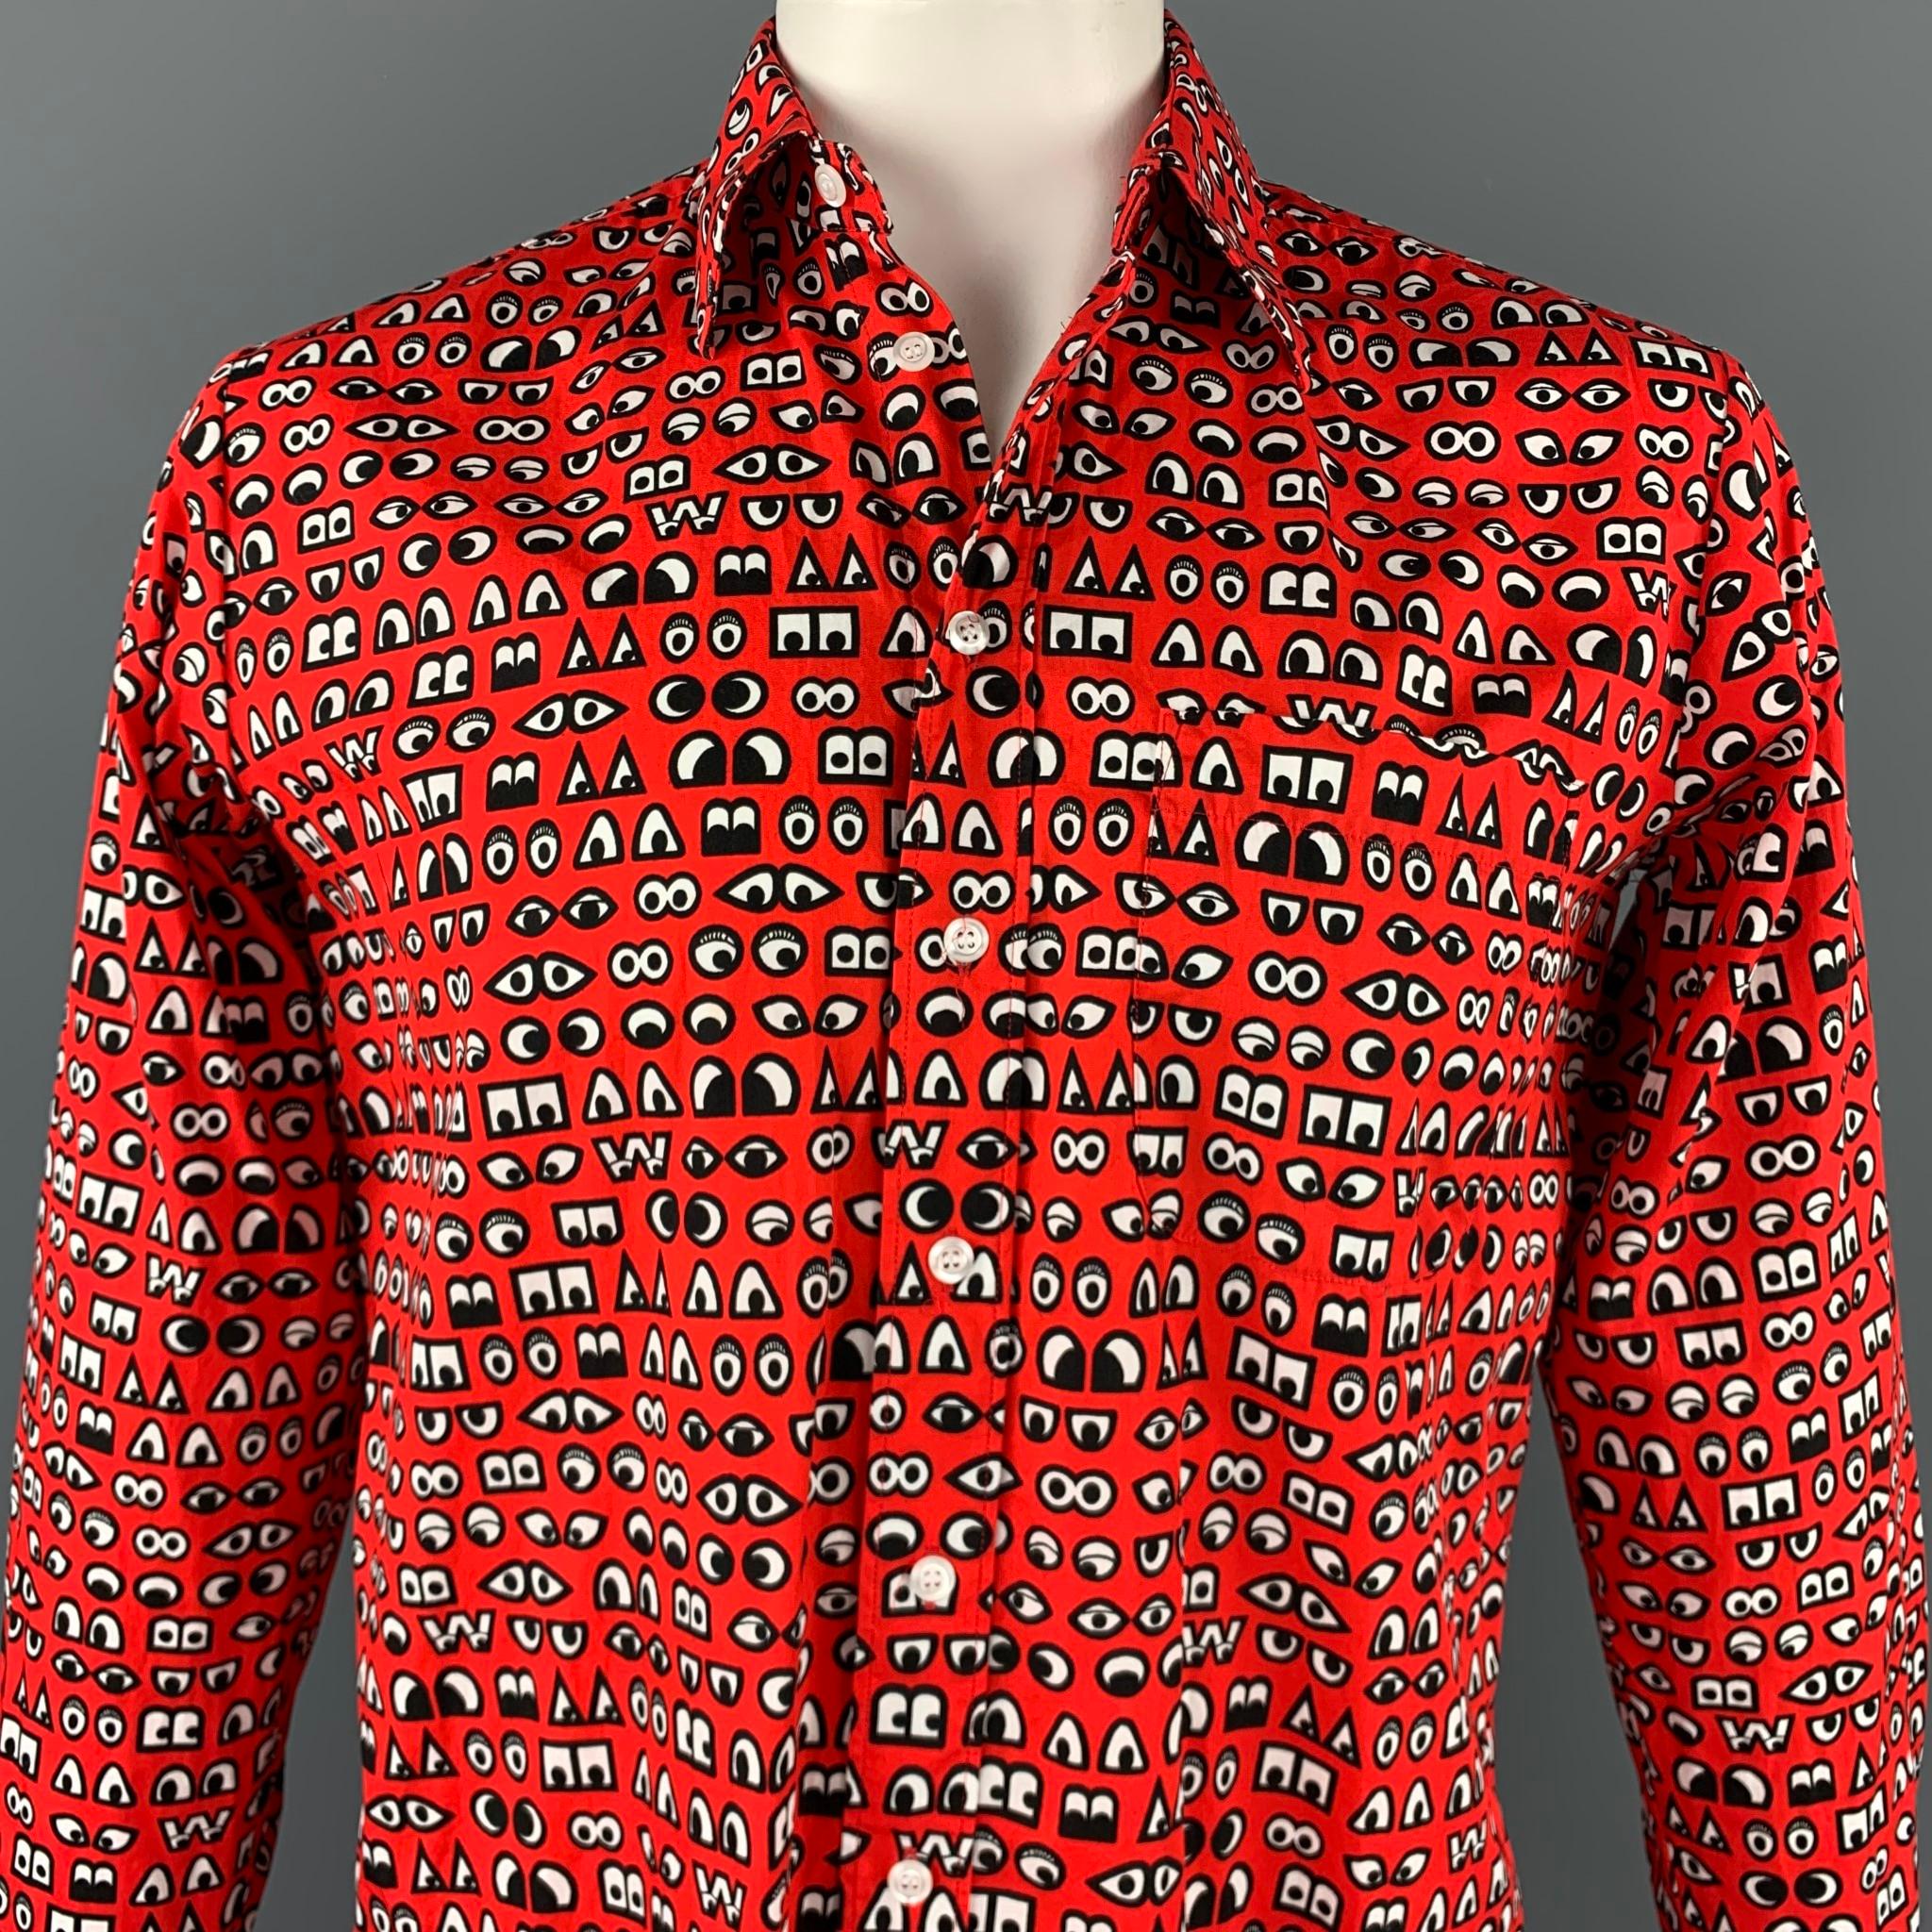 WALTER VAN BEIRENDONCK long sleeve shirt comes in a red & black 